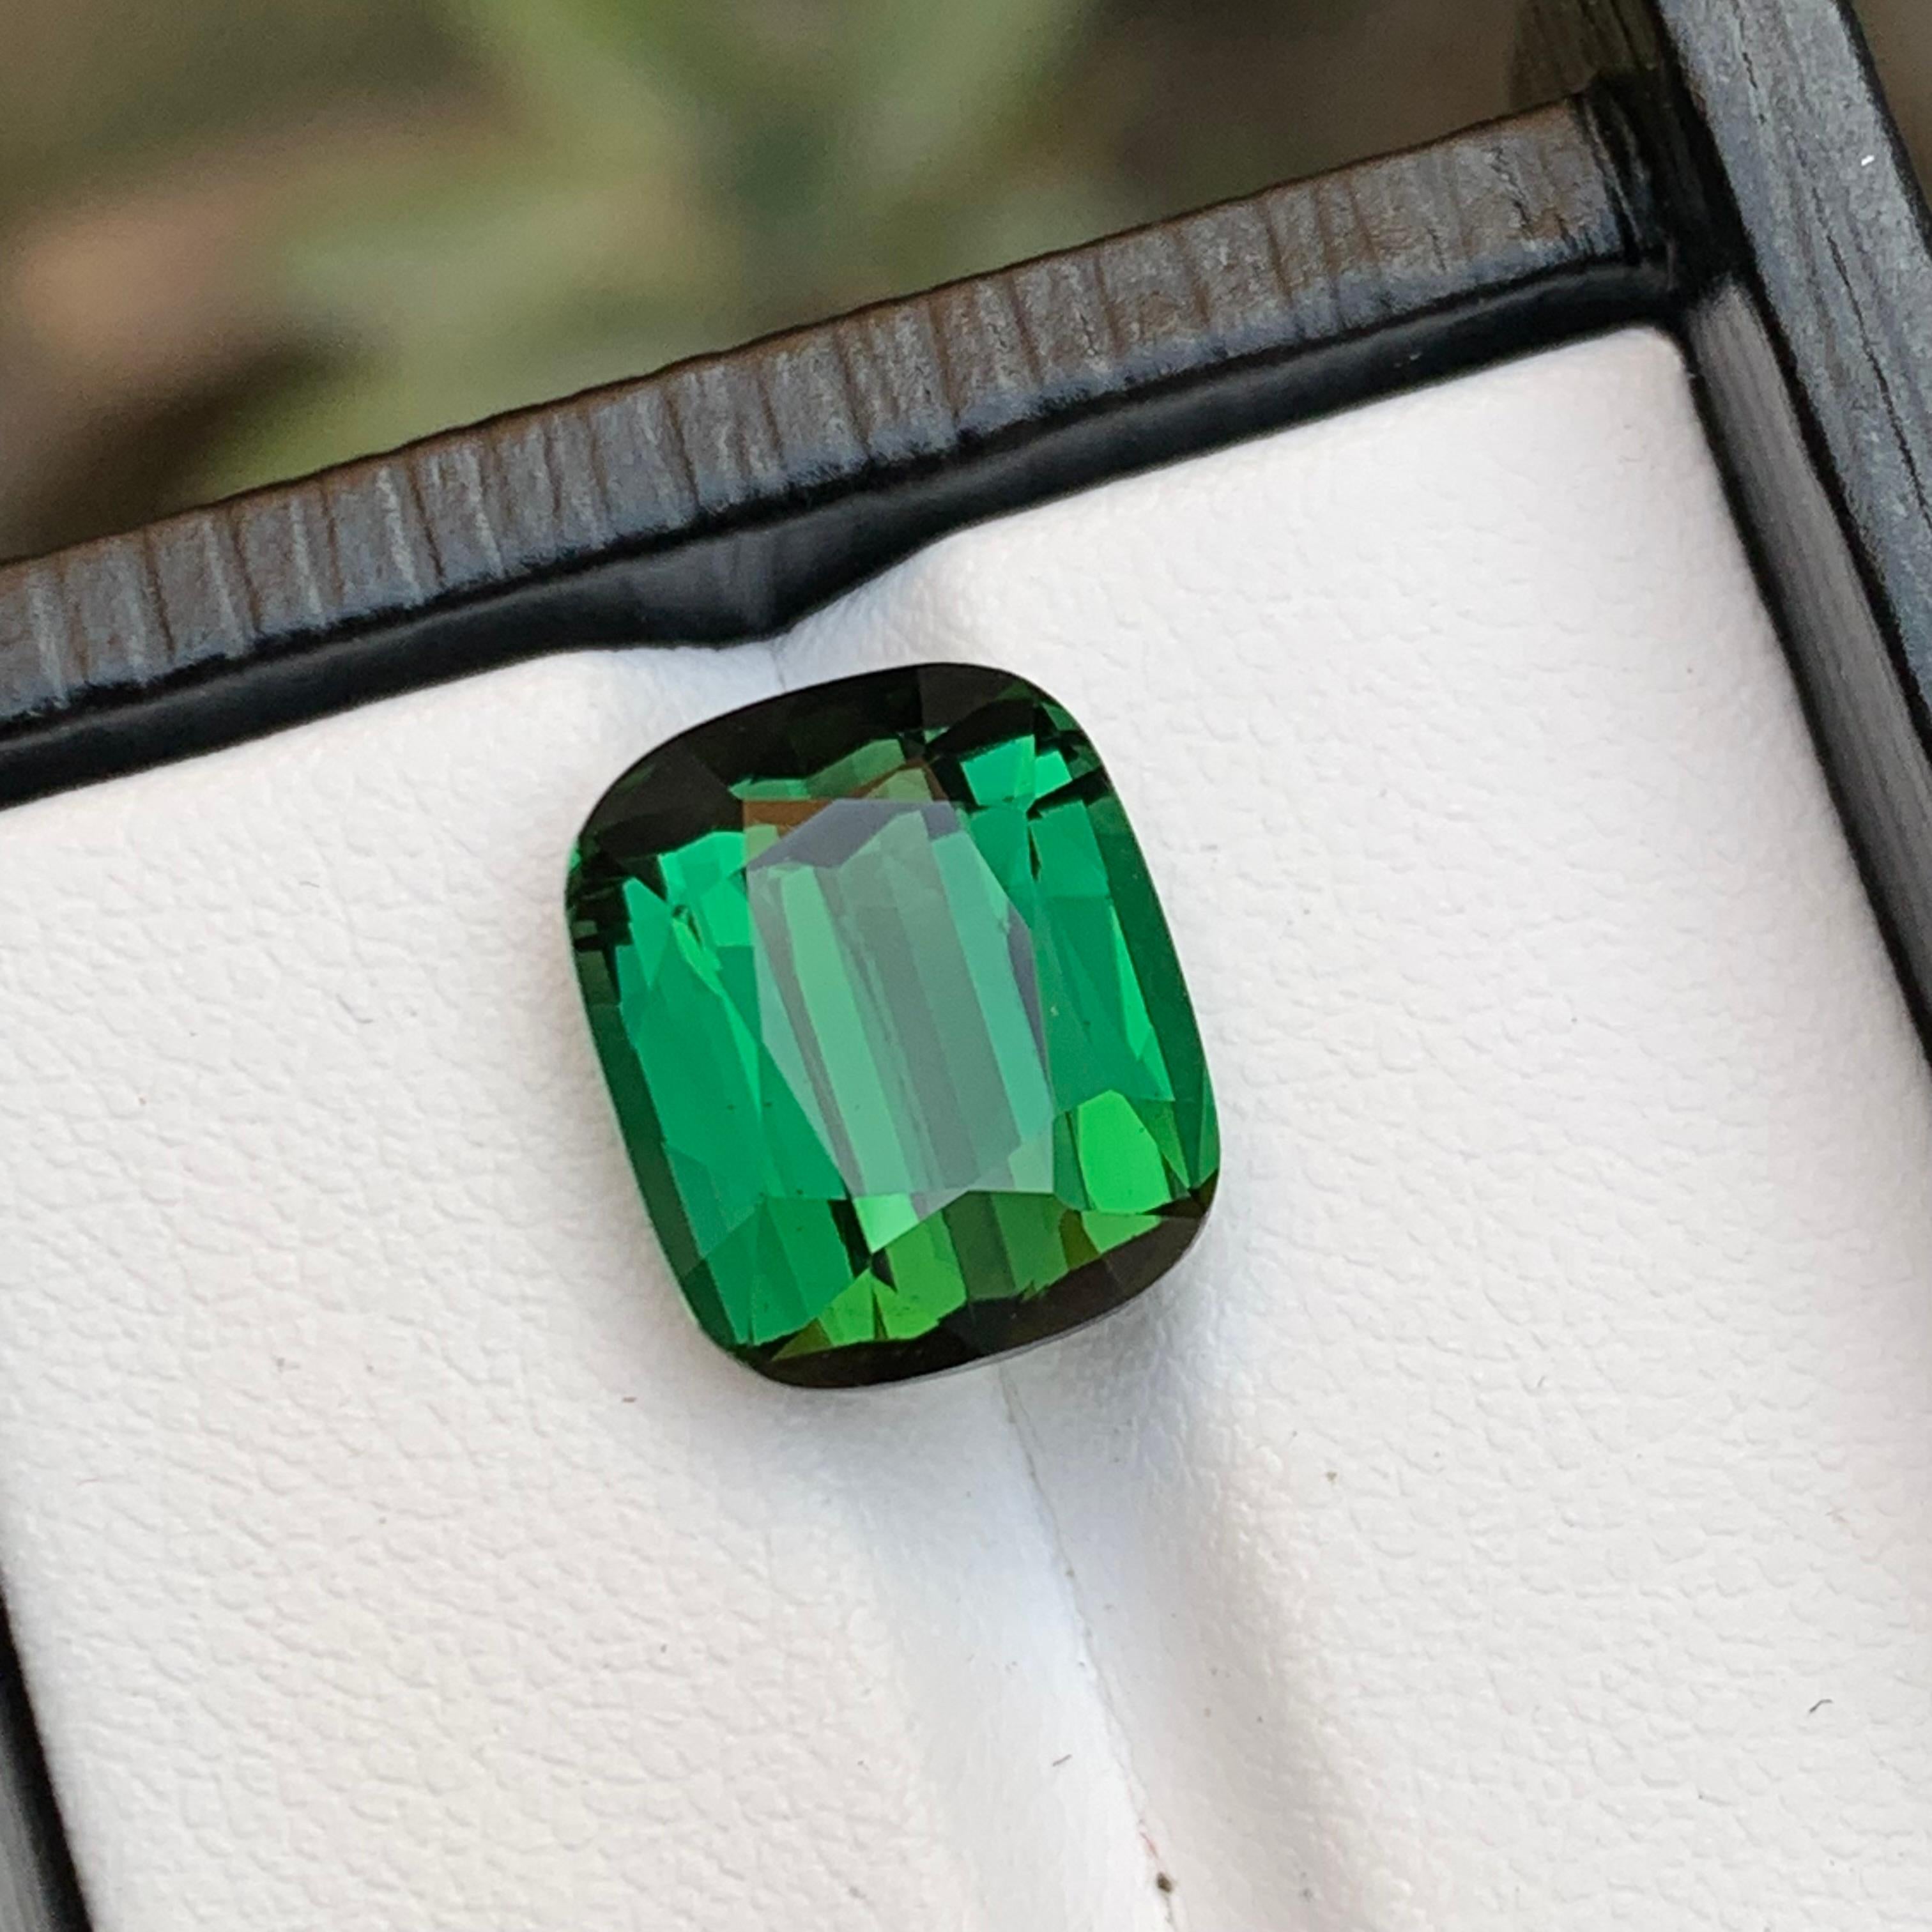 Rare Green Natural Tourmaline Gemstone, 7.65 Ct Cushion Cut for a Ring/Pendant For Sale 1